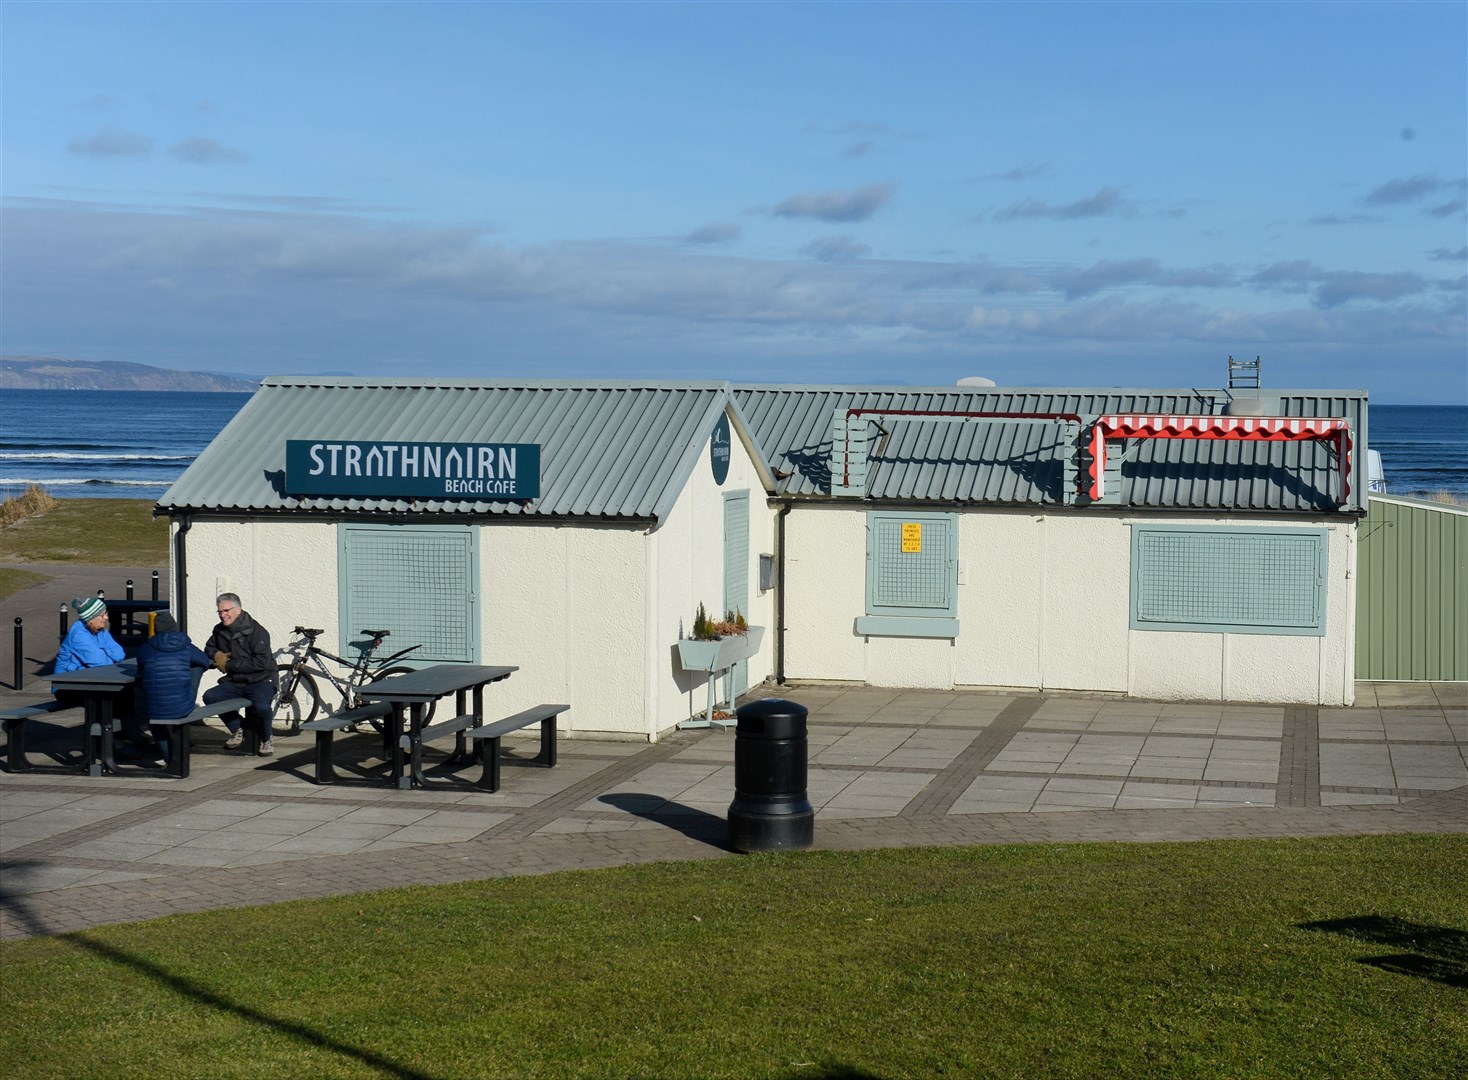 Strathnairn beach cafe. Picture: Gary Anthony